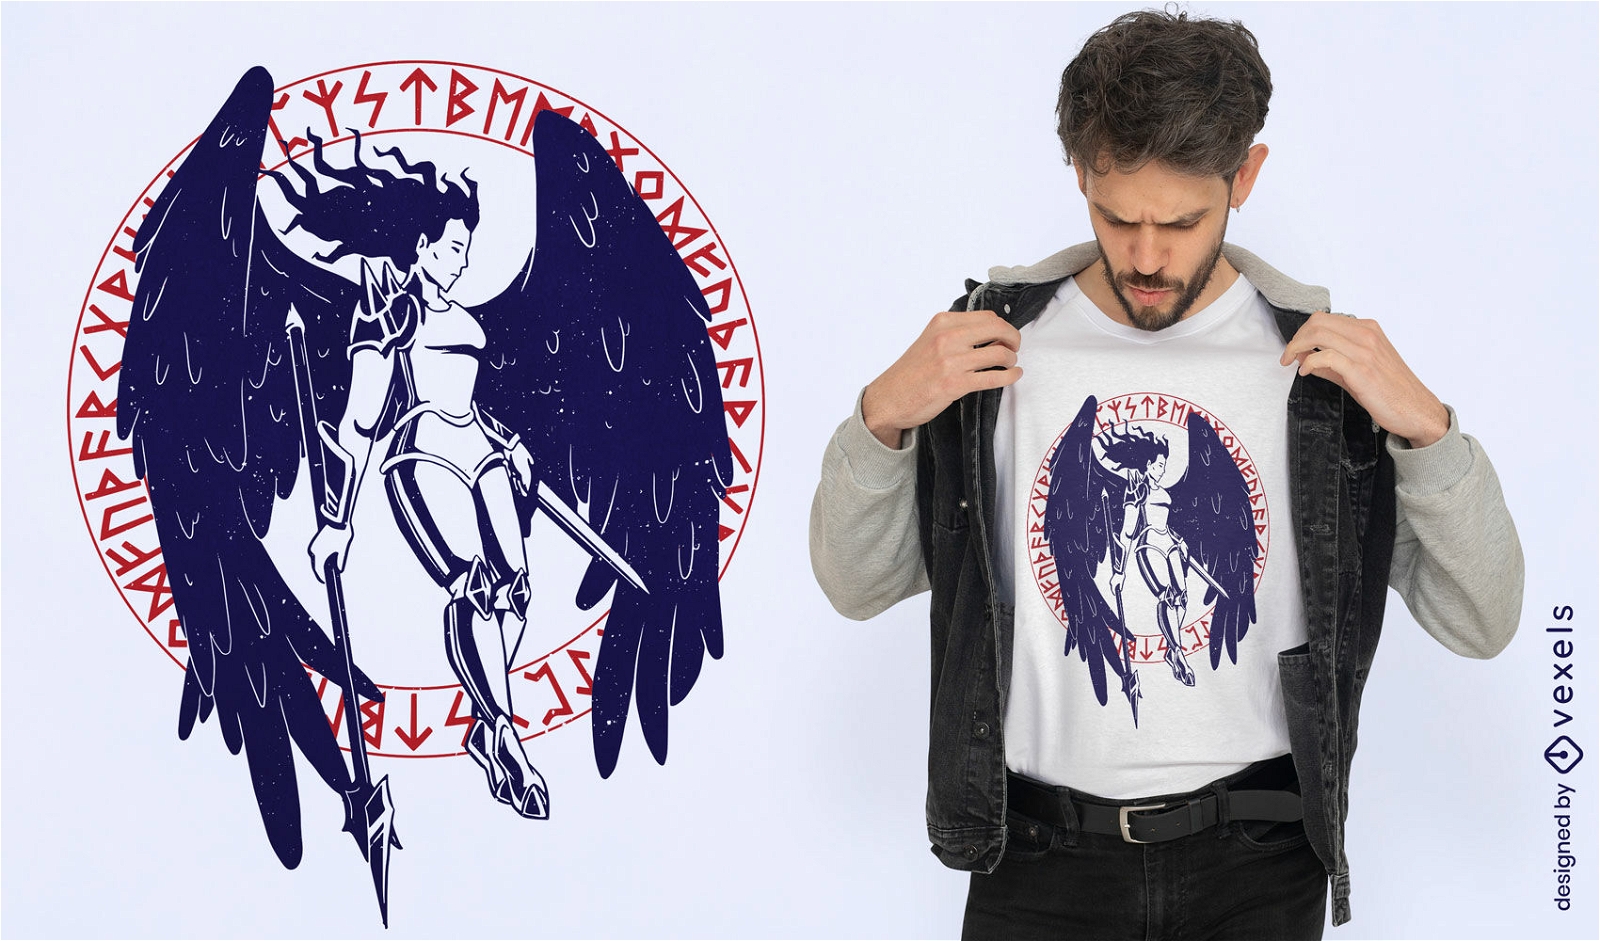 Valkyrie with big wings t-shirt design